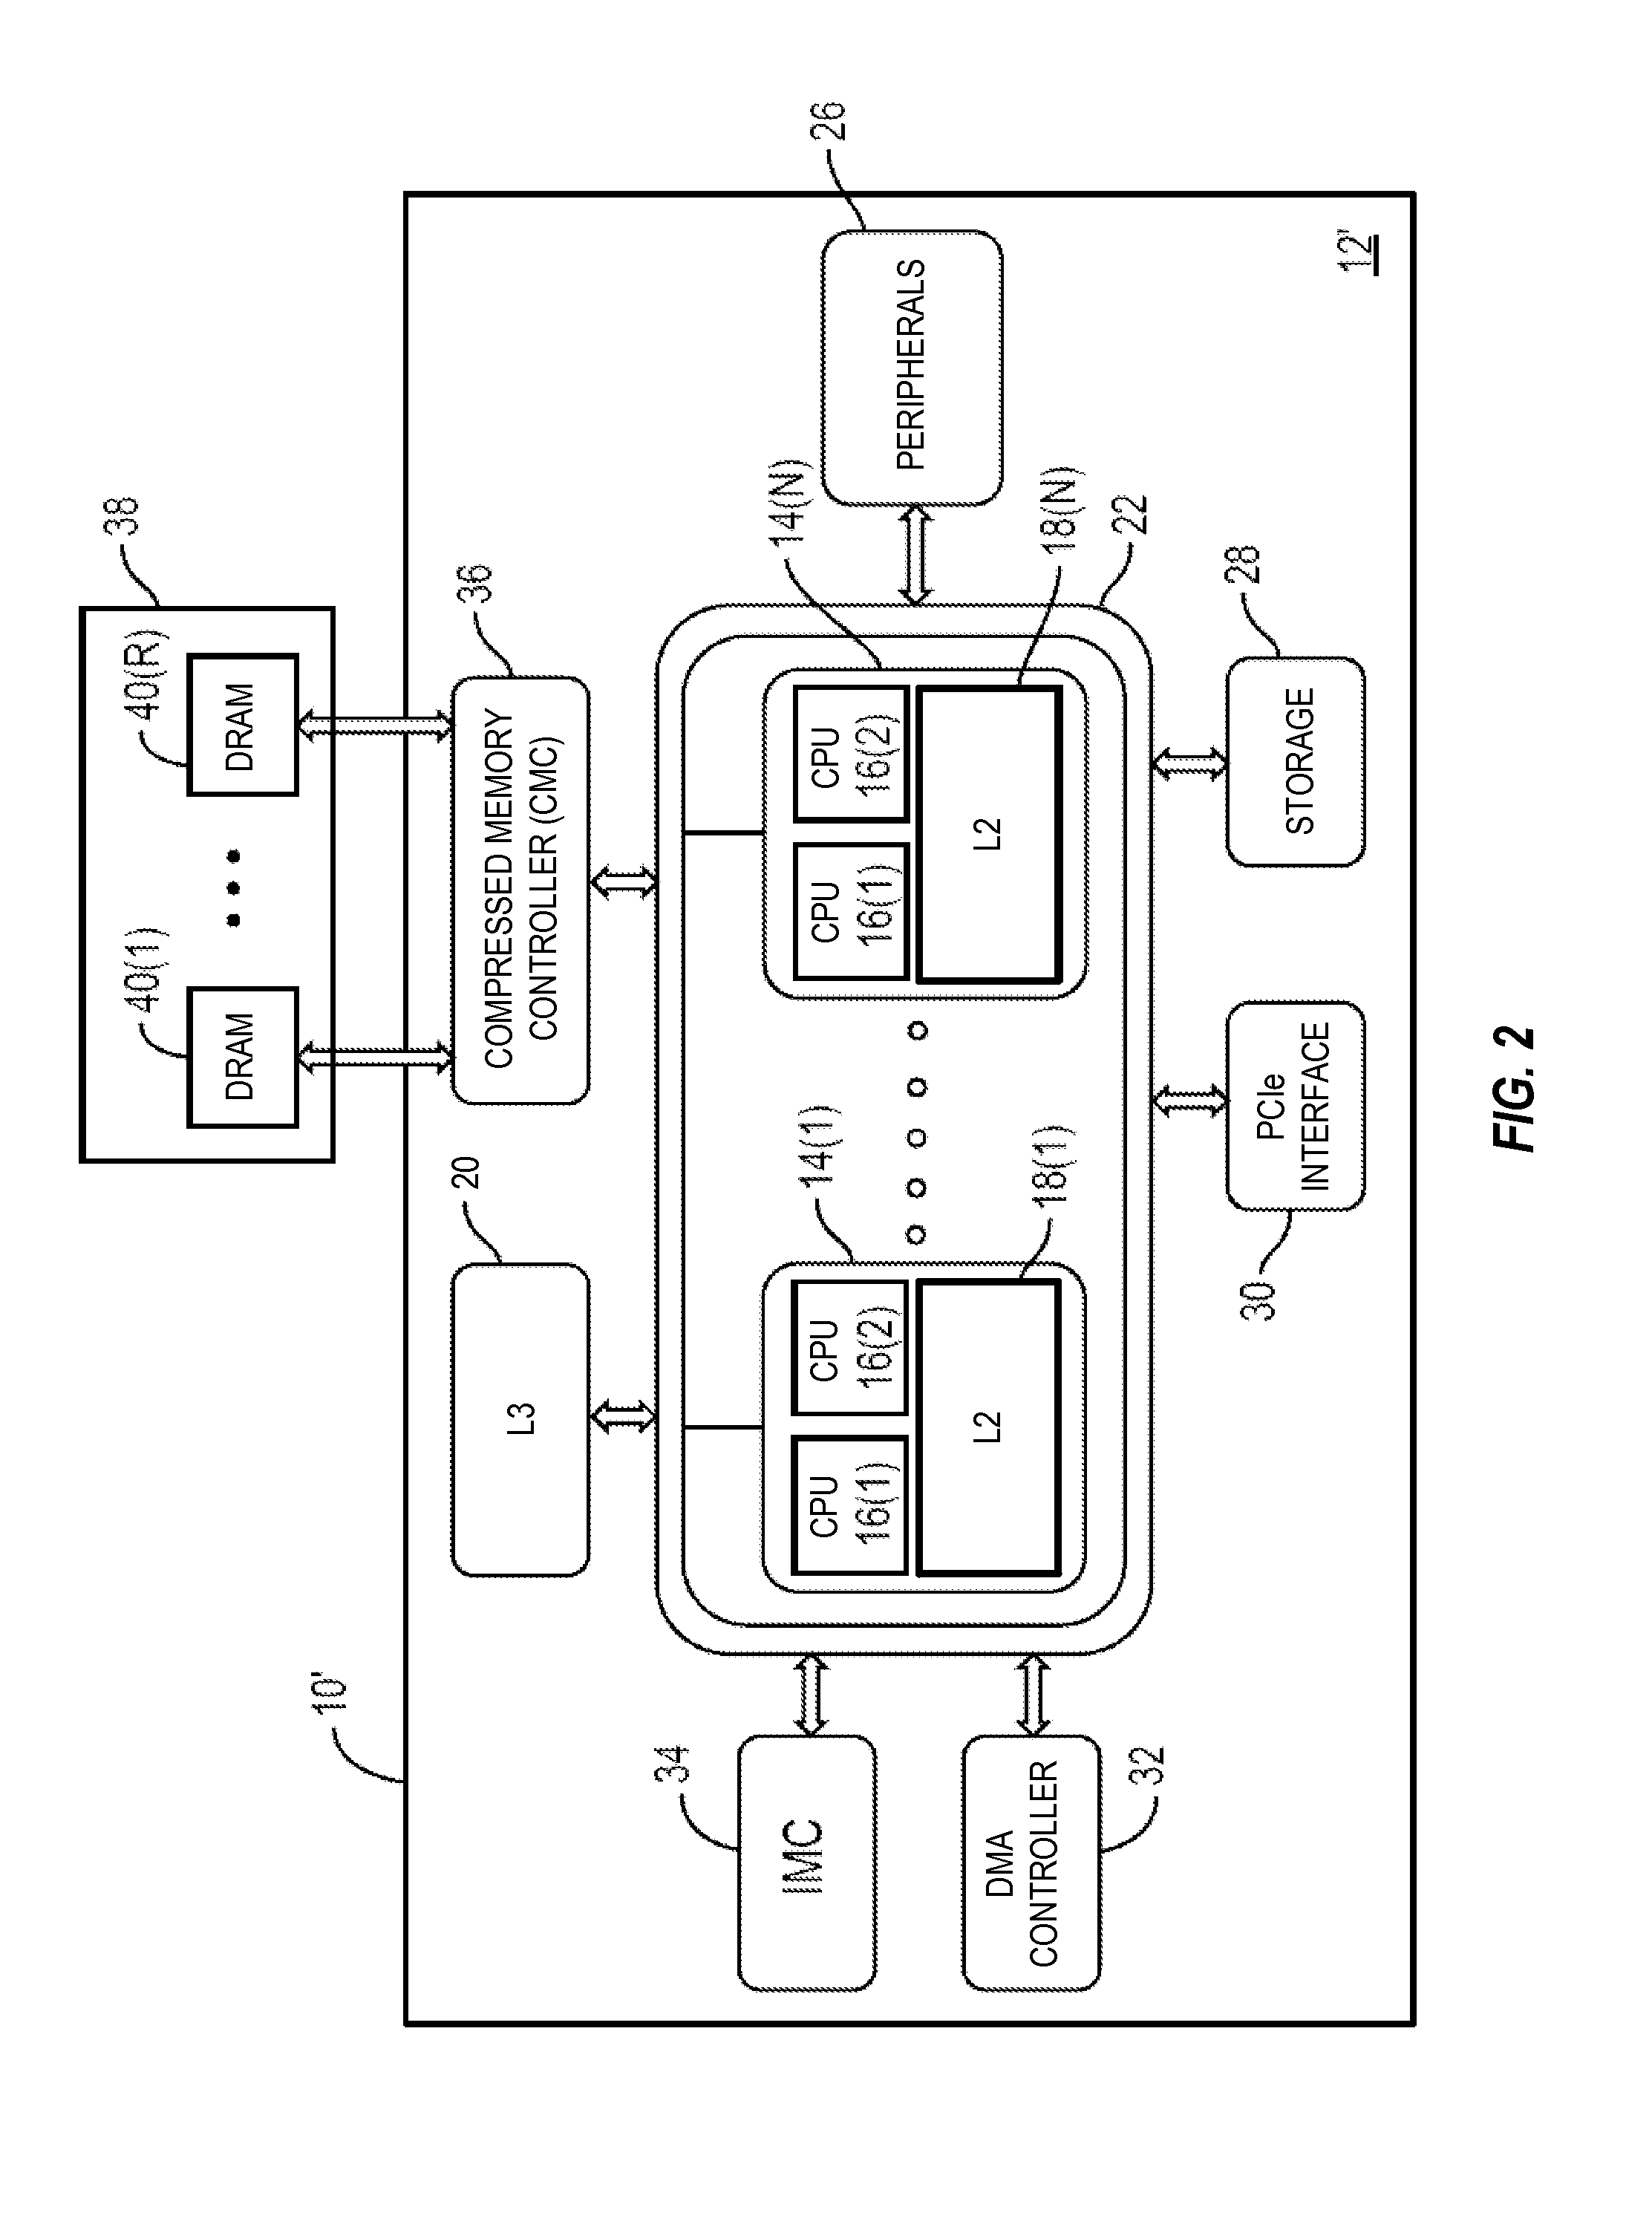 PROVIDING MEMORY BANDWIDTH COMPRESSION USING BACK-TO-BACK READ OPERATIONS BY COMPRESSED MEMORY CONTROLLERS (CMCs) IN A CENTRAL PROCESSING UNIT (CPU)-BASED SYSTEM